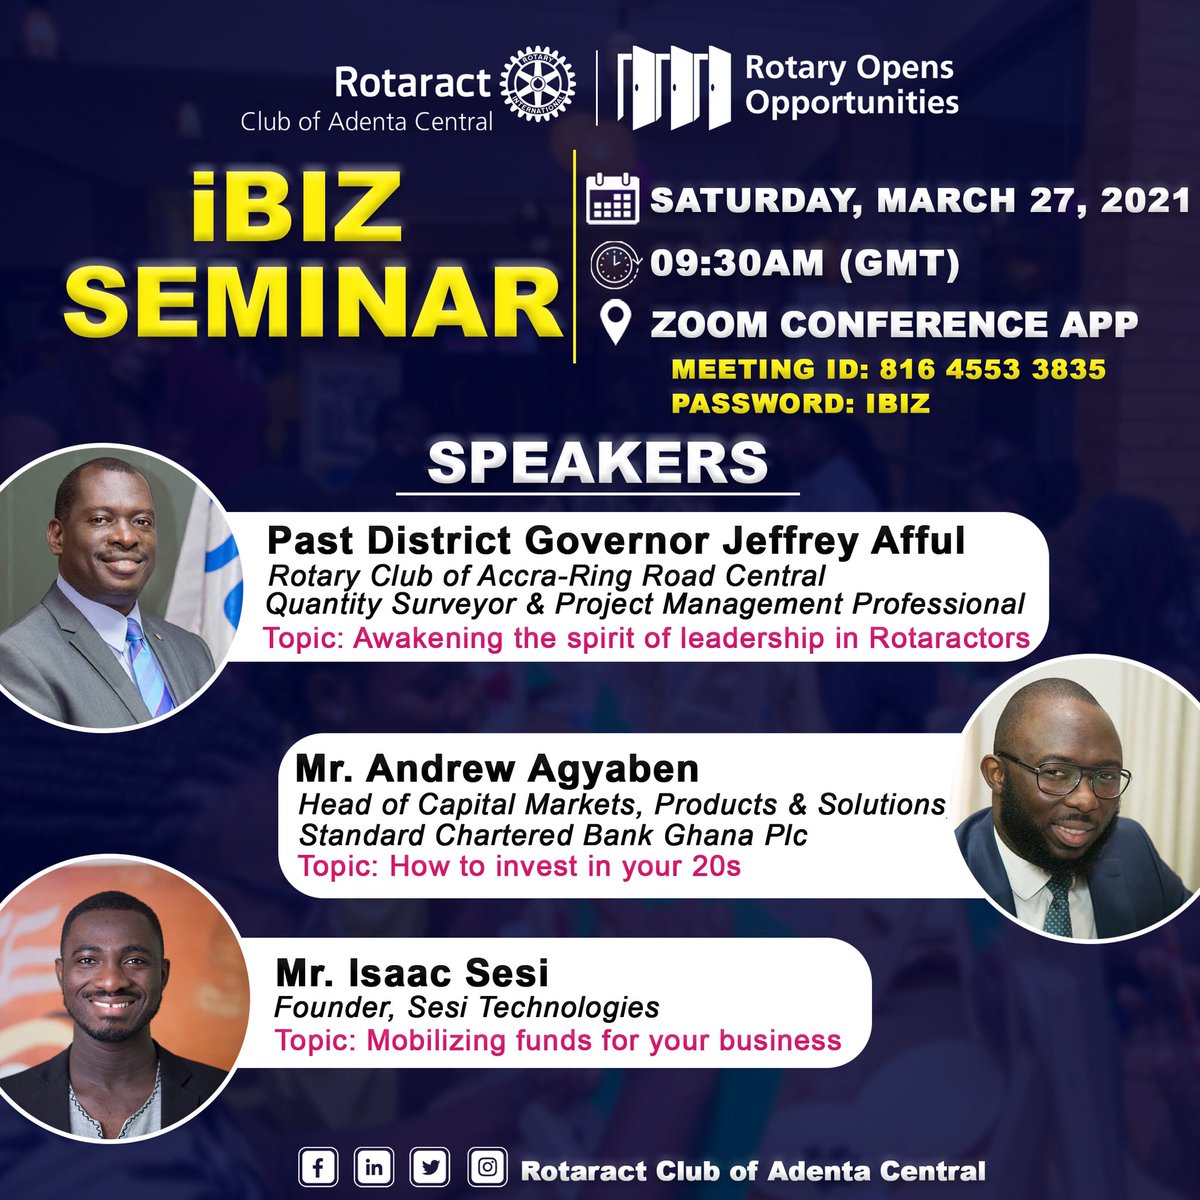 Rotaract Club of Adenta Central is inviting  all to the 2021 IBIZ Seminar🔥🔥

Topics for discussion
🔸Mobilizing Funds For Your Business
🔸How to Invest in Your 20s
🔸Awakening the Spirit of Leadership in Rotaractors

#ConnectWithAdentaCentral
#RotaryOpensOpportunities